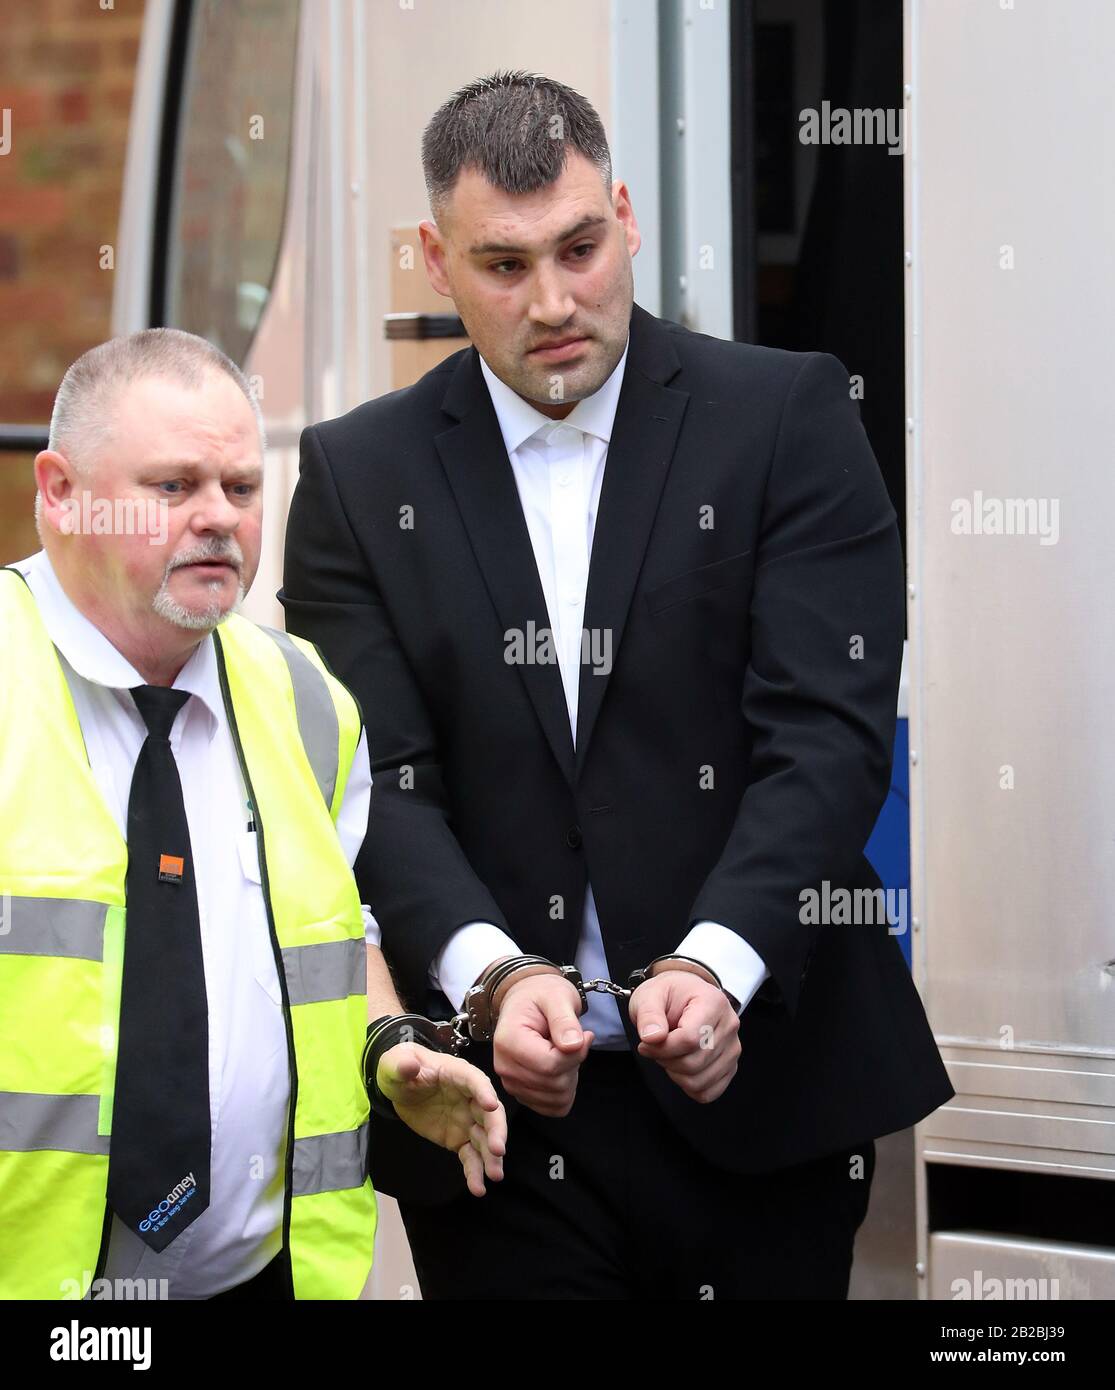 Michael Roe arriving at Lewes Crown Court where he is charged with the murder of a child under one year old between September 8 and 11 2018; wounding or inflicting grievous bodily harm without intent and causing or allowing the death of a child, in connection with the death of his daughter, Holly. Stock Photo